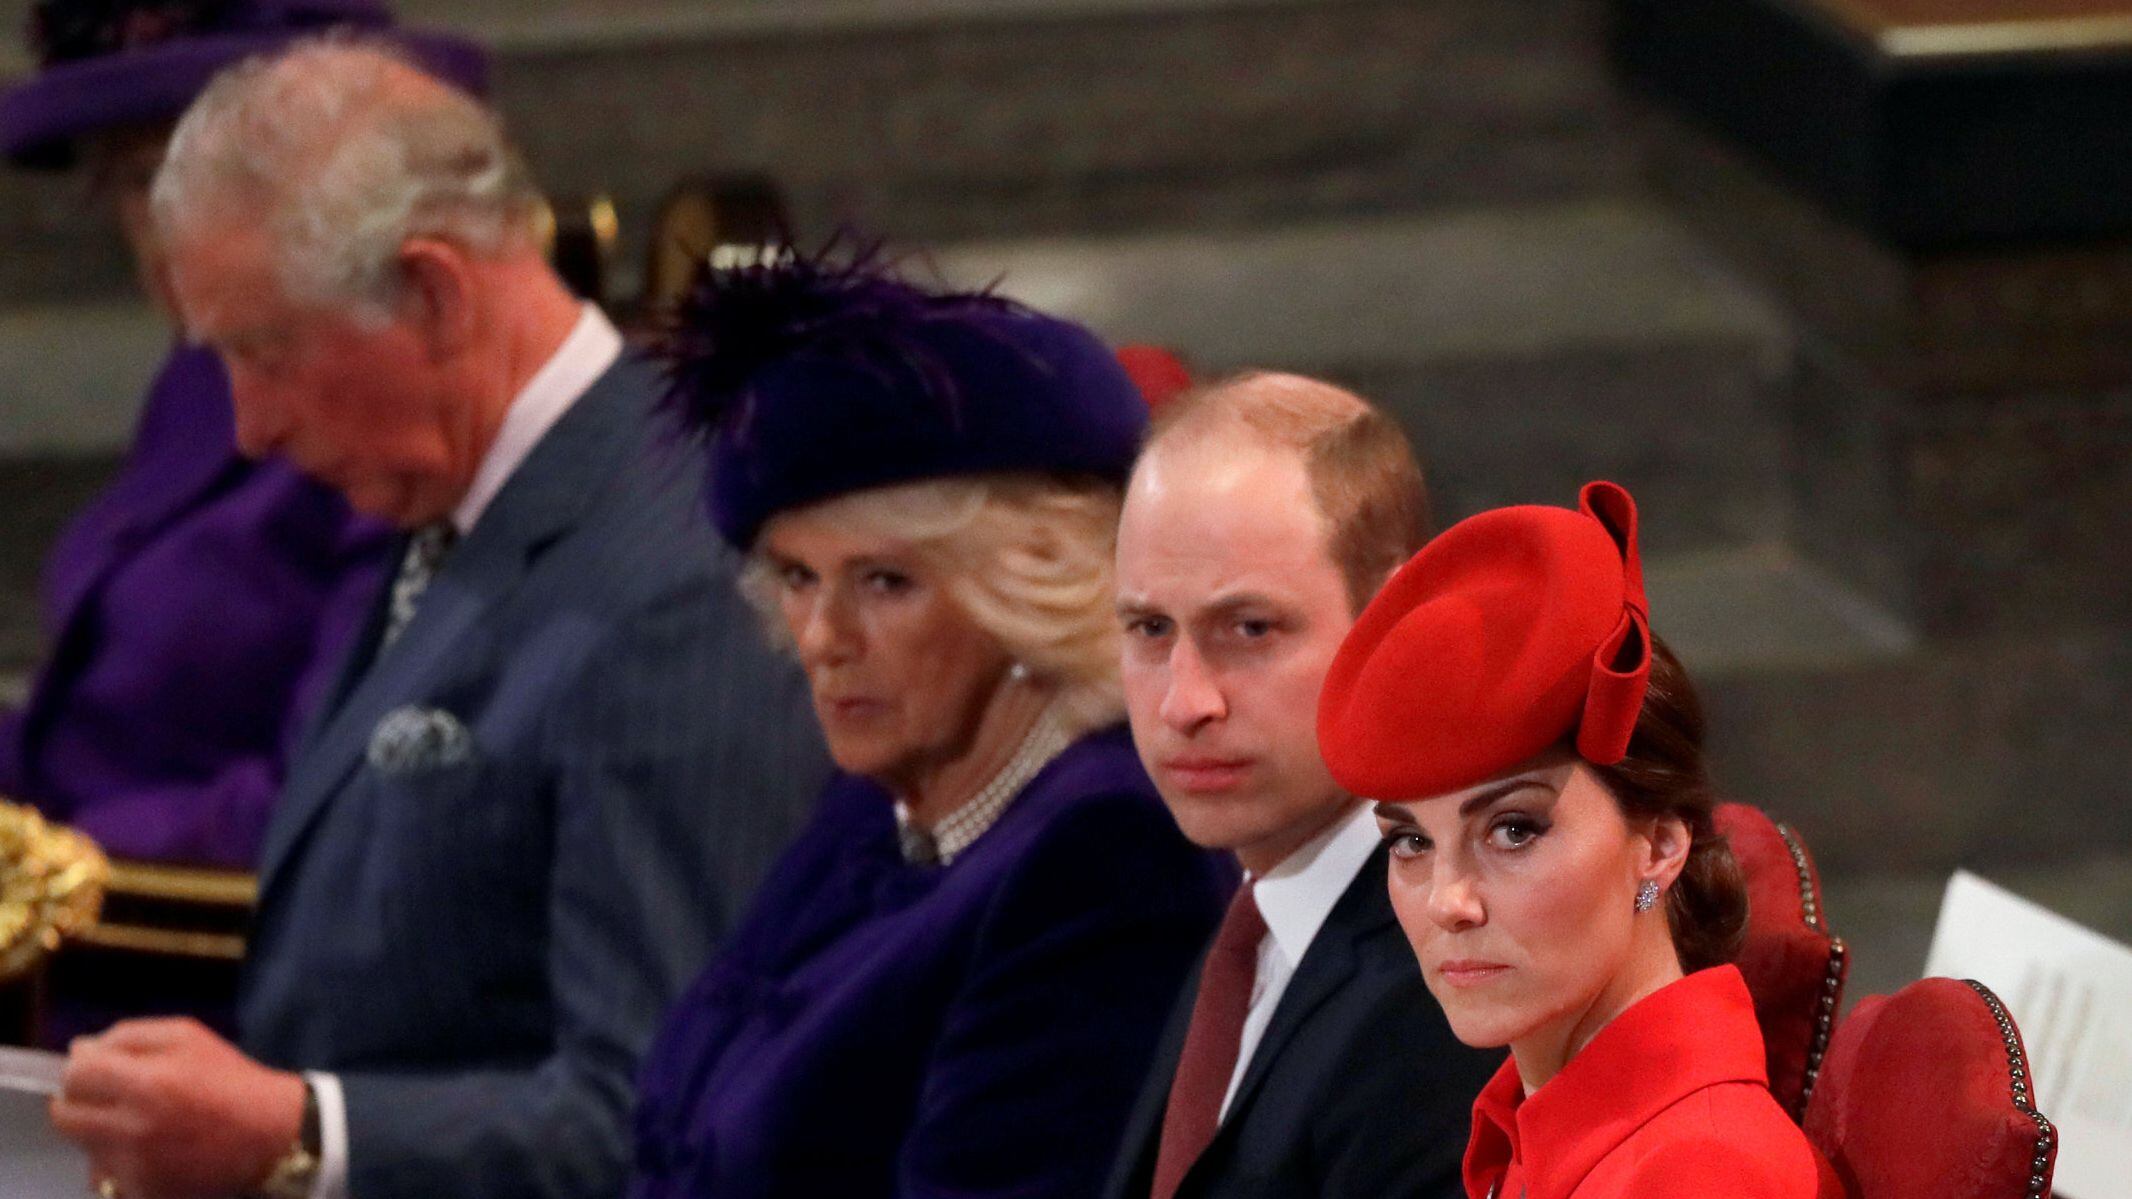 Britain's Kate, Duchess of Cambridge sits with Prince William, Camilla, the Duchess of Cornwall and Prince Charles, Prince Andrew, Meghan, the Duchess of Sussex and Prince Harry, at the Commonwealth Service at Westminster Abbey in London, Britain March 11, 2019. Kirsty Wigglesworth/Pool via REUTERS